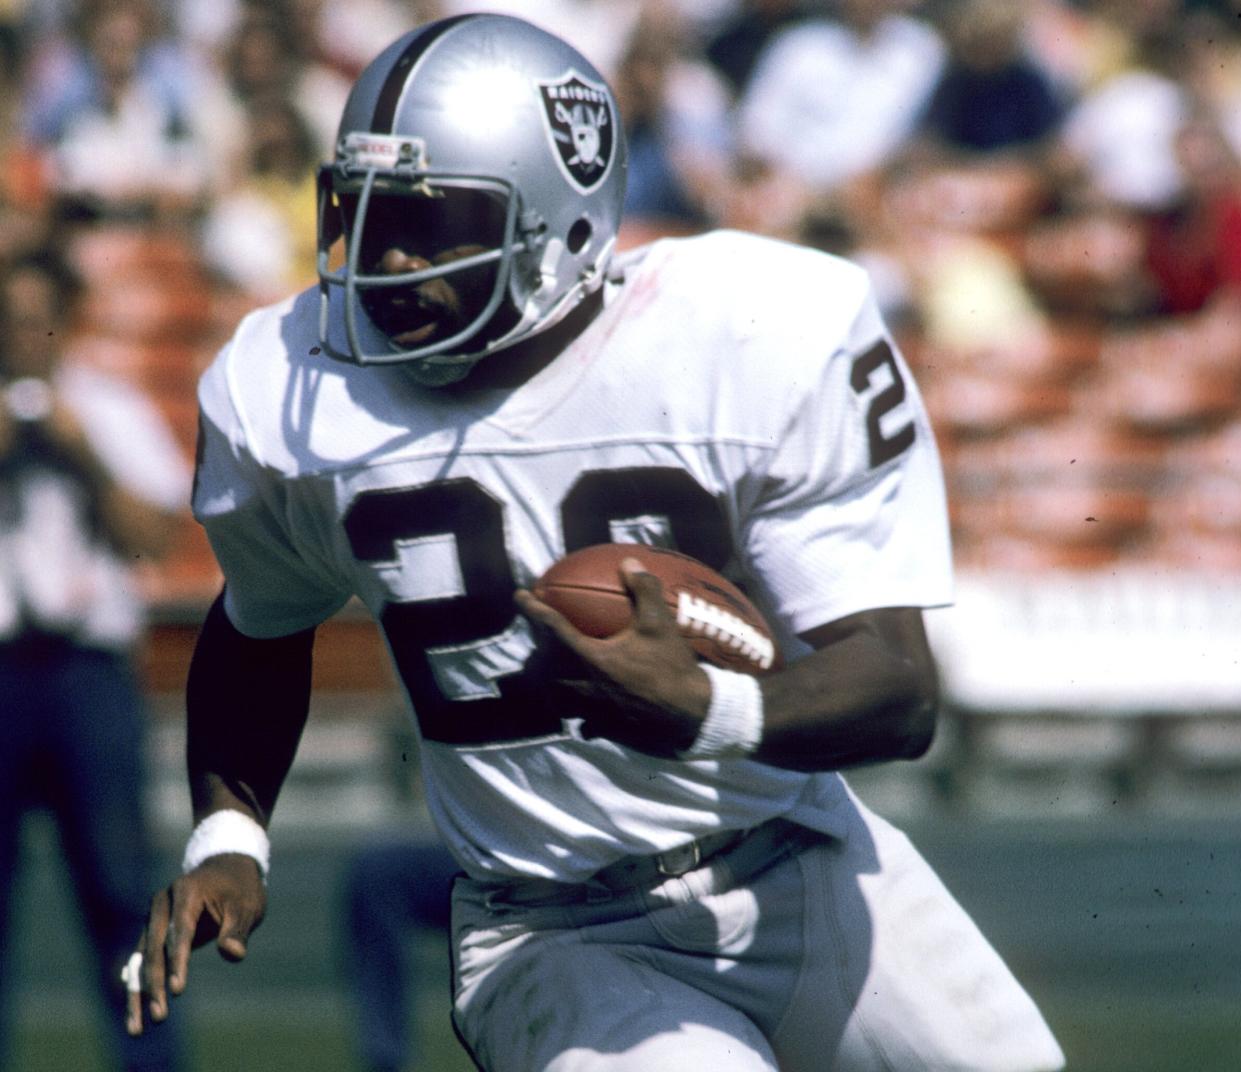 Former Oakland Raiders running back Clarence Davis, seen here in 1974, is still alive per the Raiders, who earlier Thursday posted that he had died. (James Flores/Getty Images)